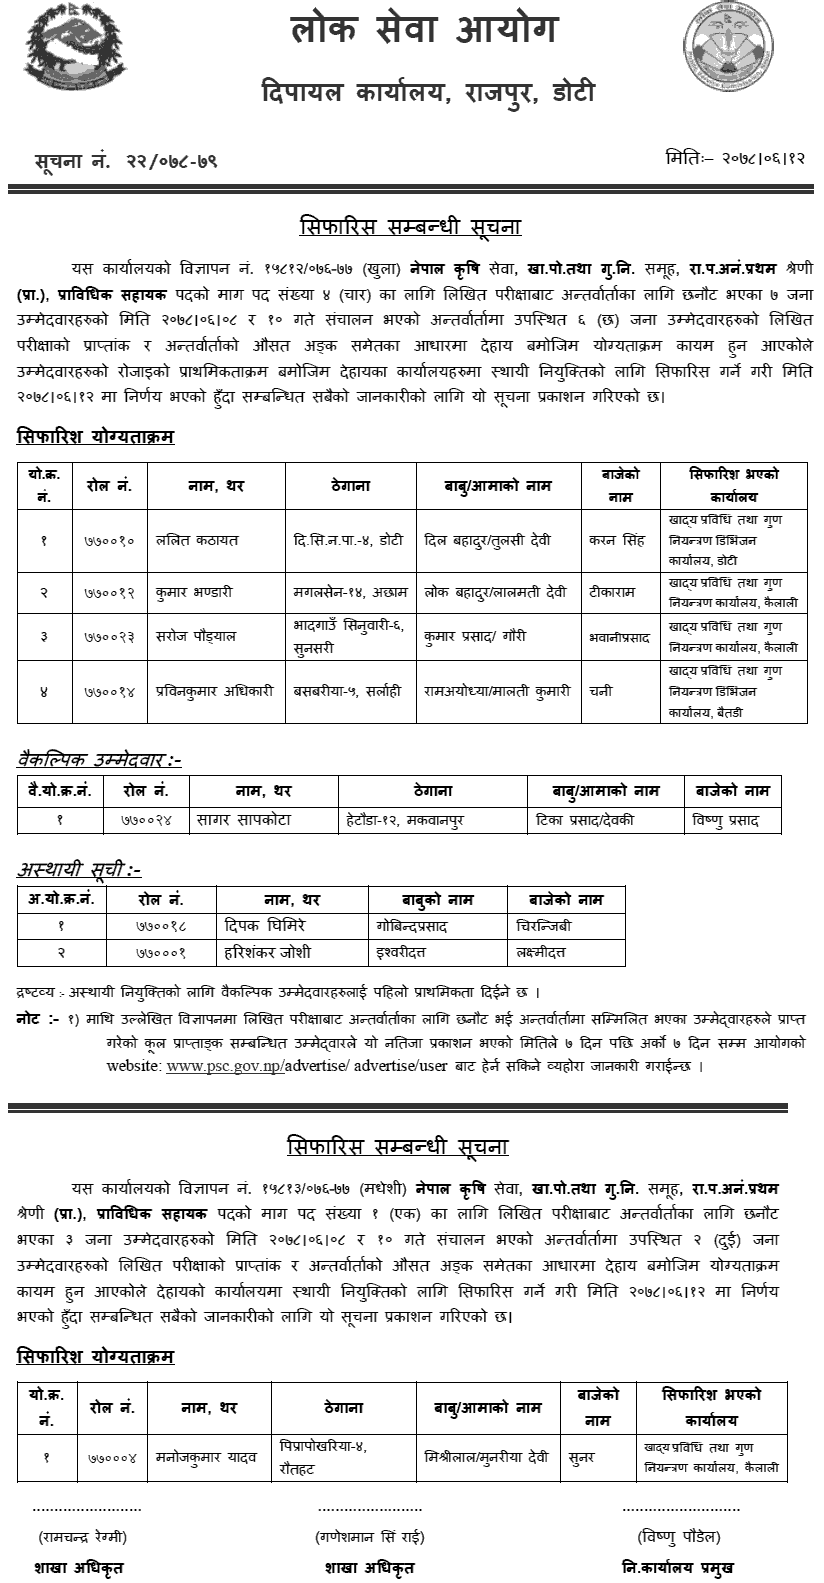 Lok Sewa Aayog Dipayal Final Result of Technical Assistant (Food Production and Quality Control)